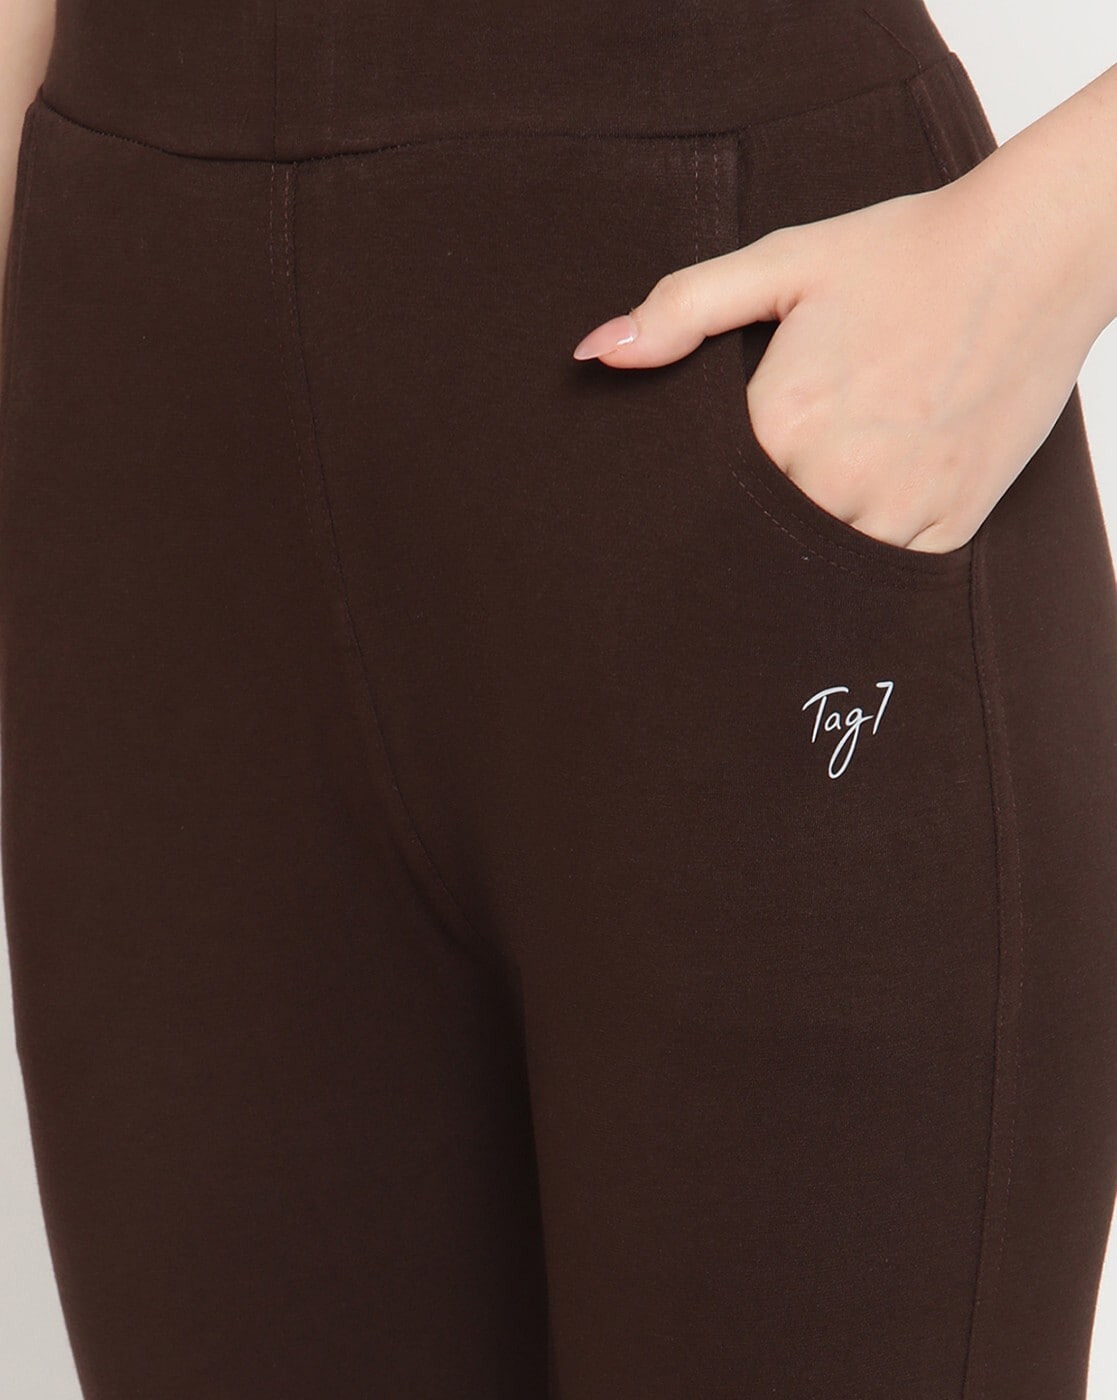 Buy Brown & Off White Leggings for Women by TAG 7 Online